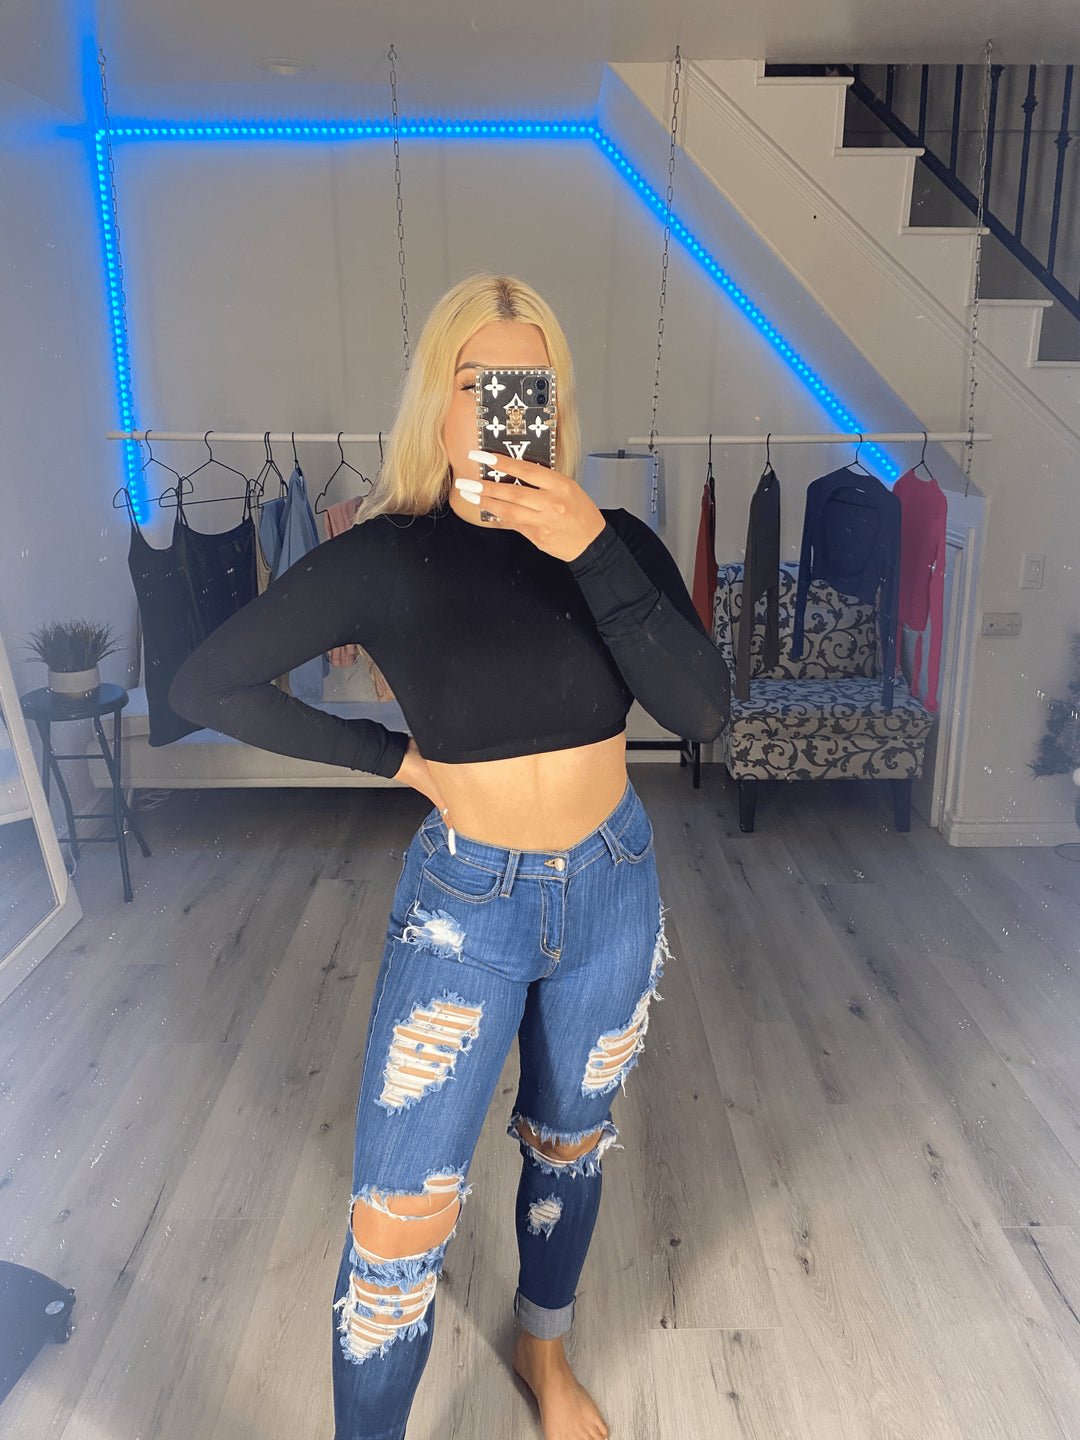 Molly High Waisted Jeans - Style Baby OMG Fashion Boutique - Stylebabyomg - Buy - Aesthetic Baddie Outfits - Babyboo - OOTD - Shie 